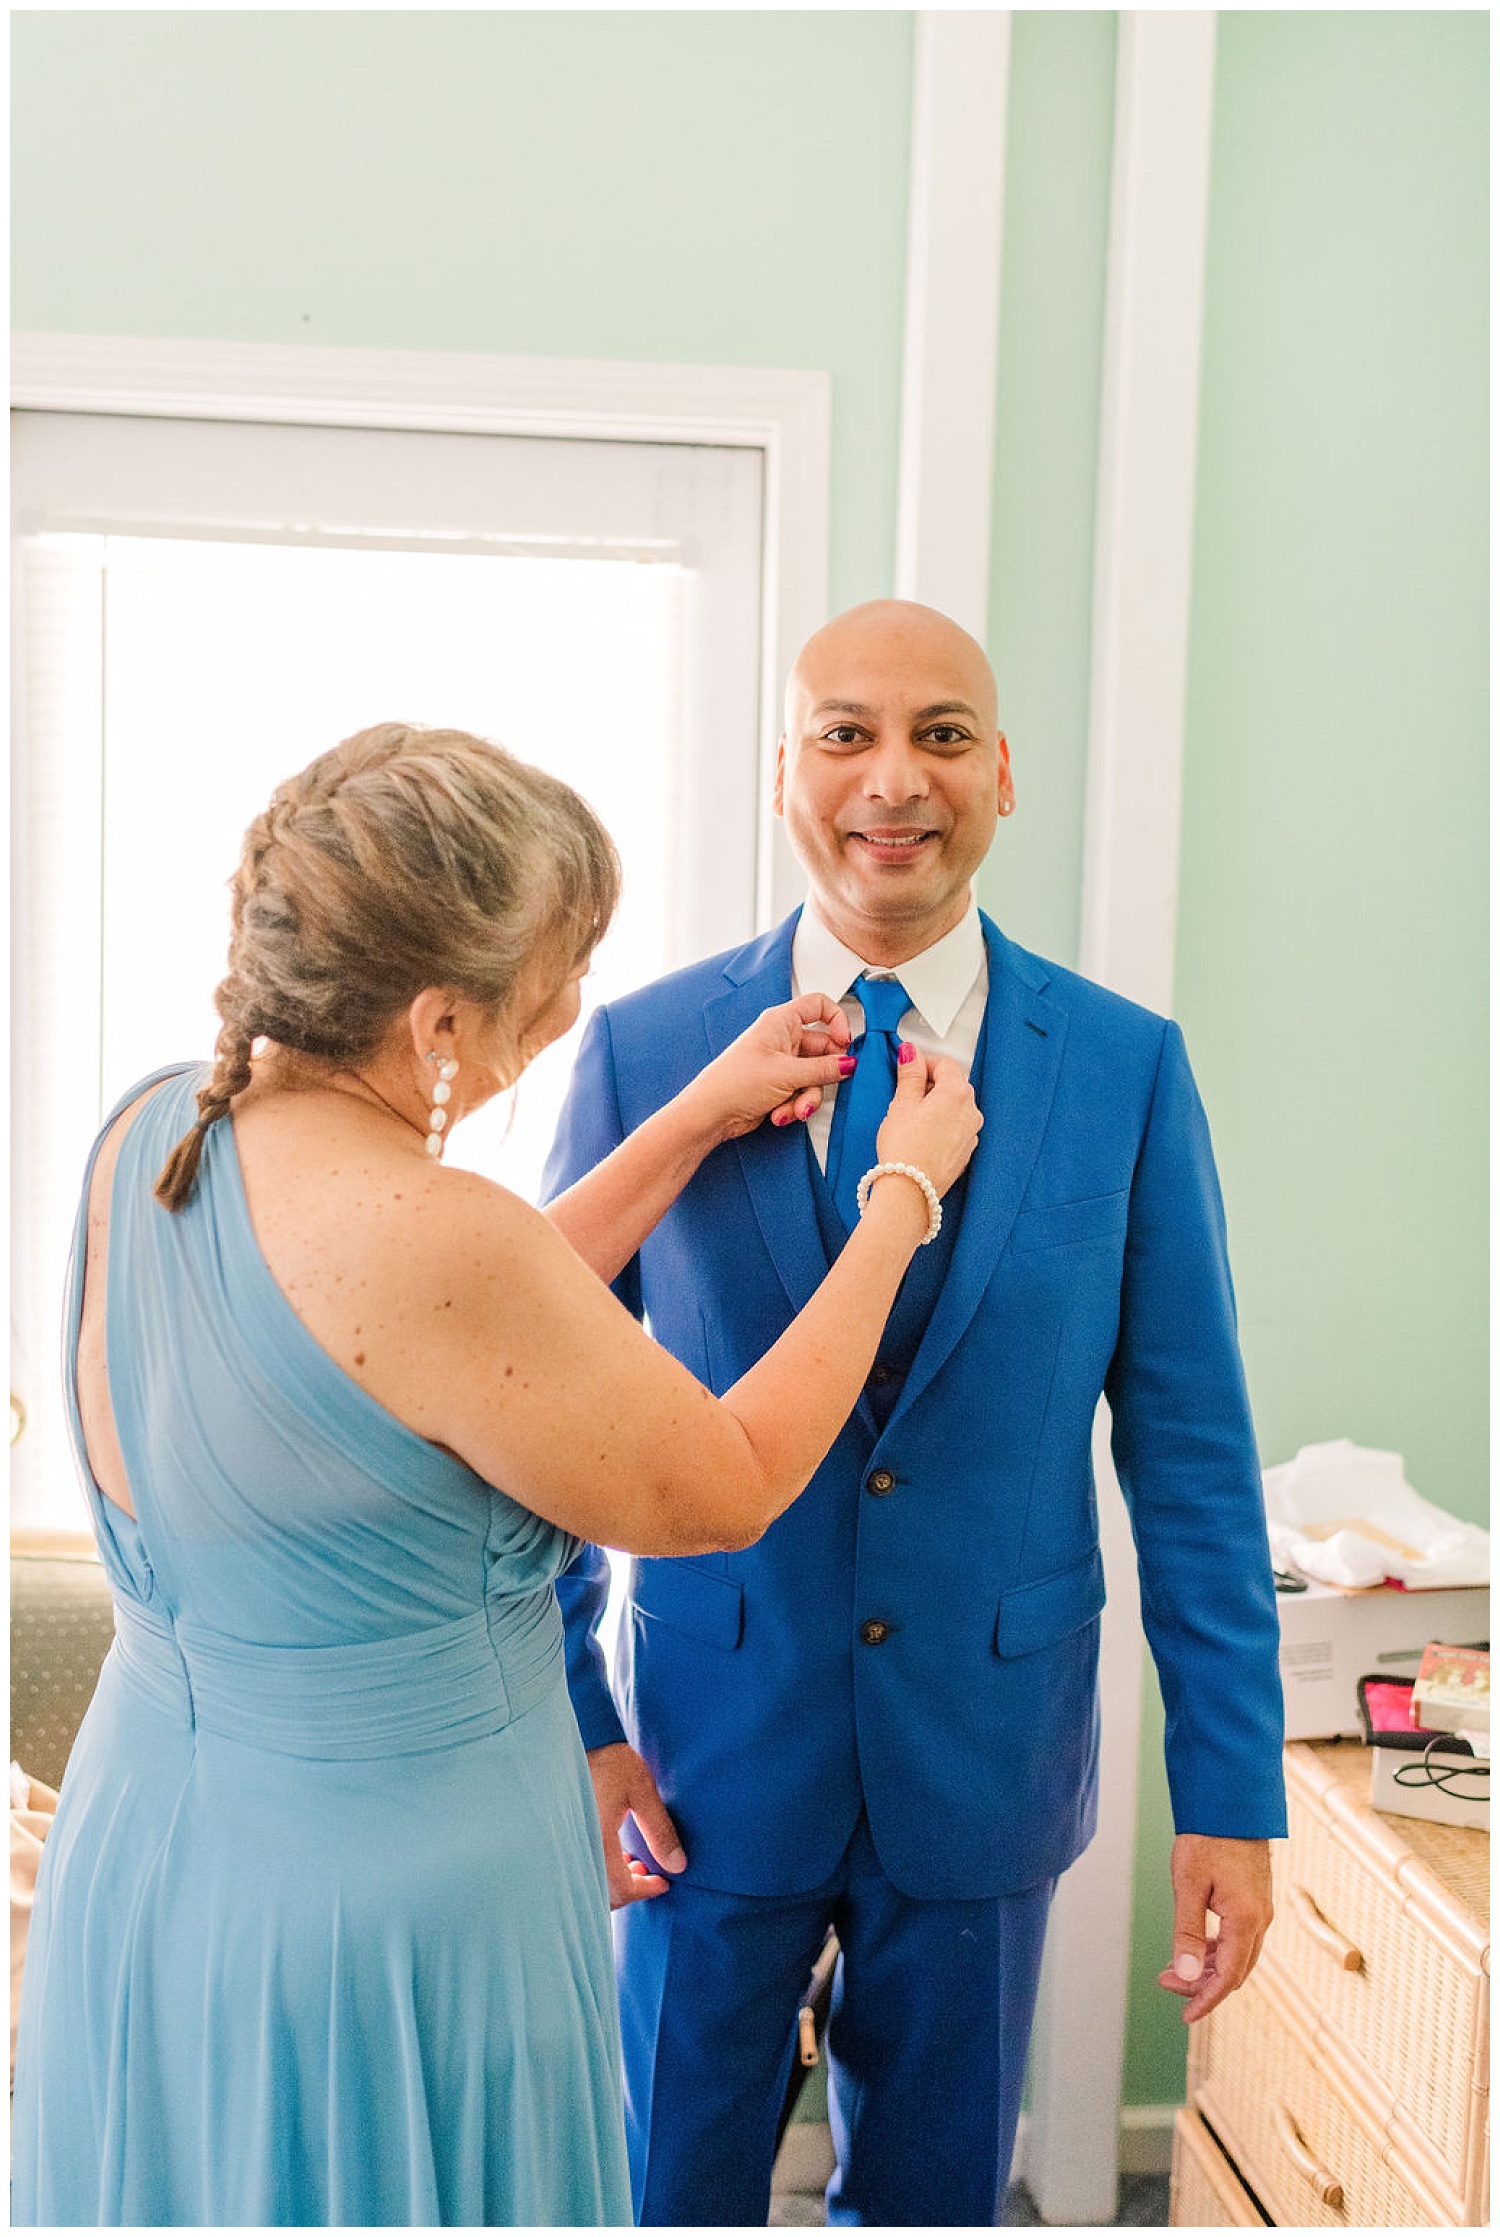 groom getting his tie adjusted while getting ready before the wedding